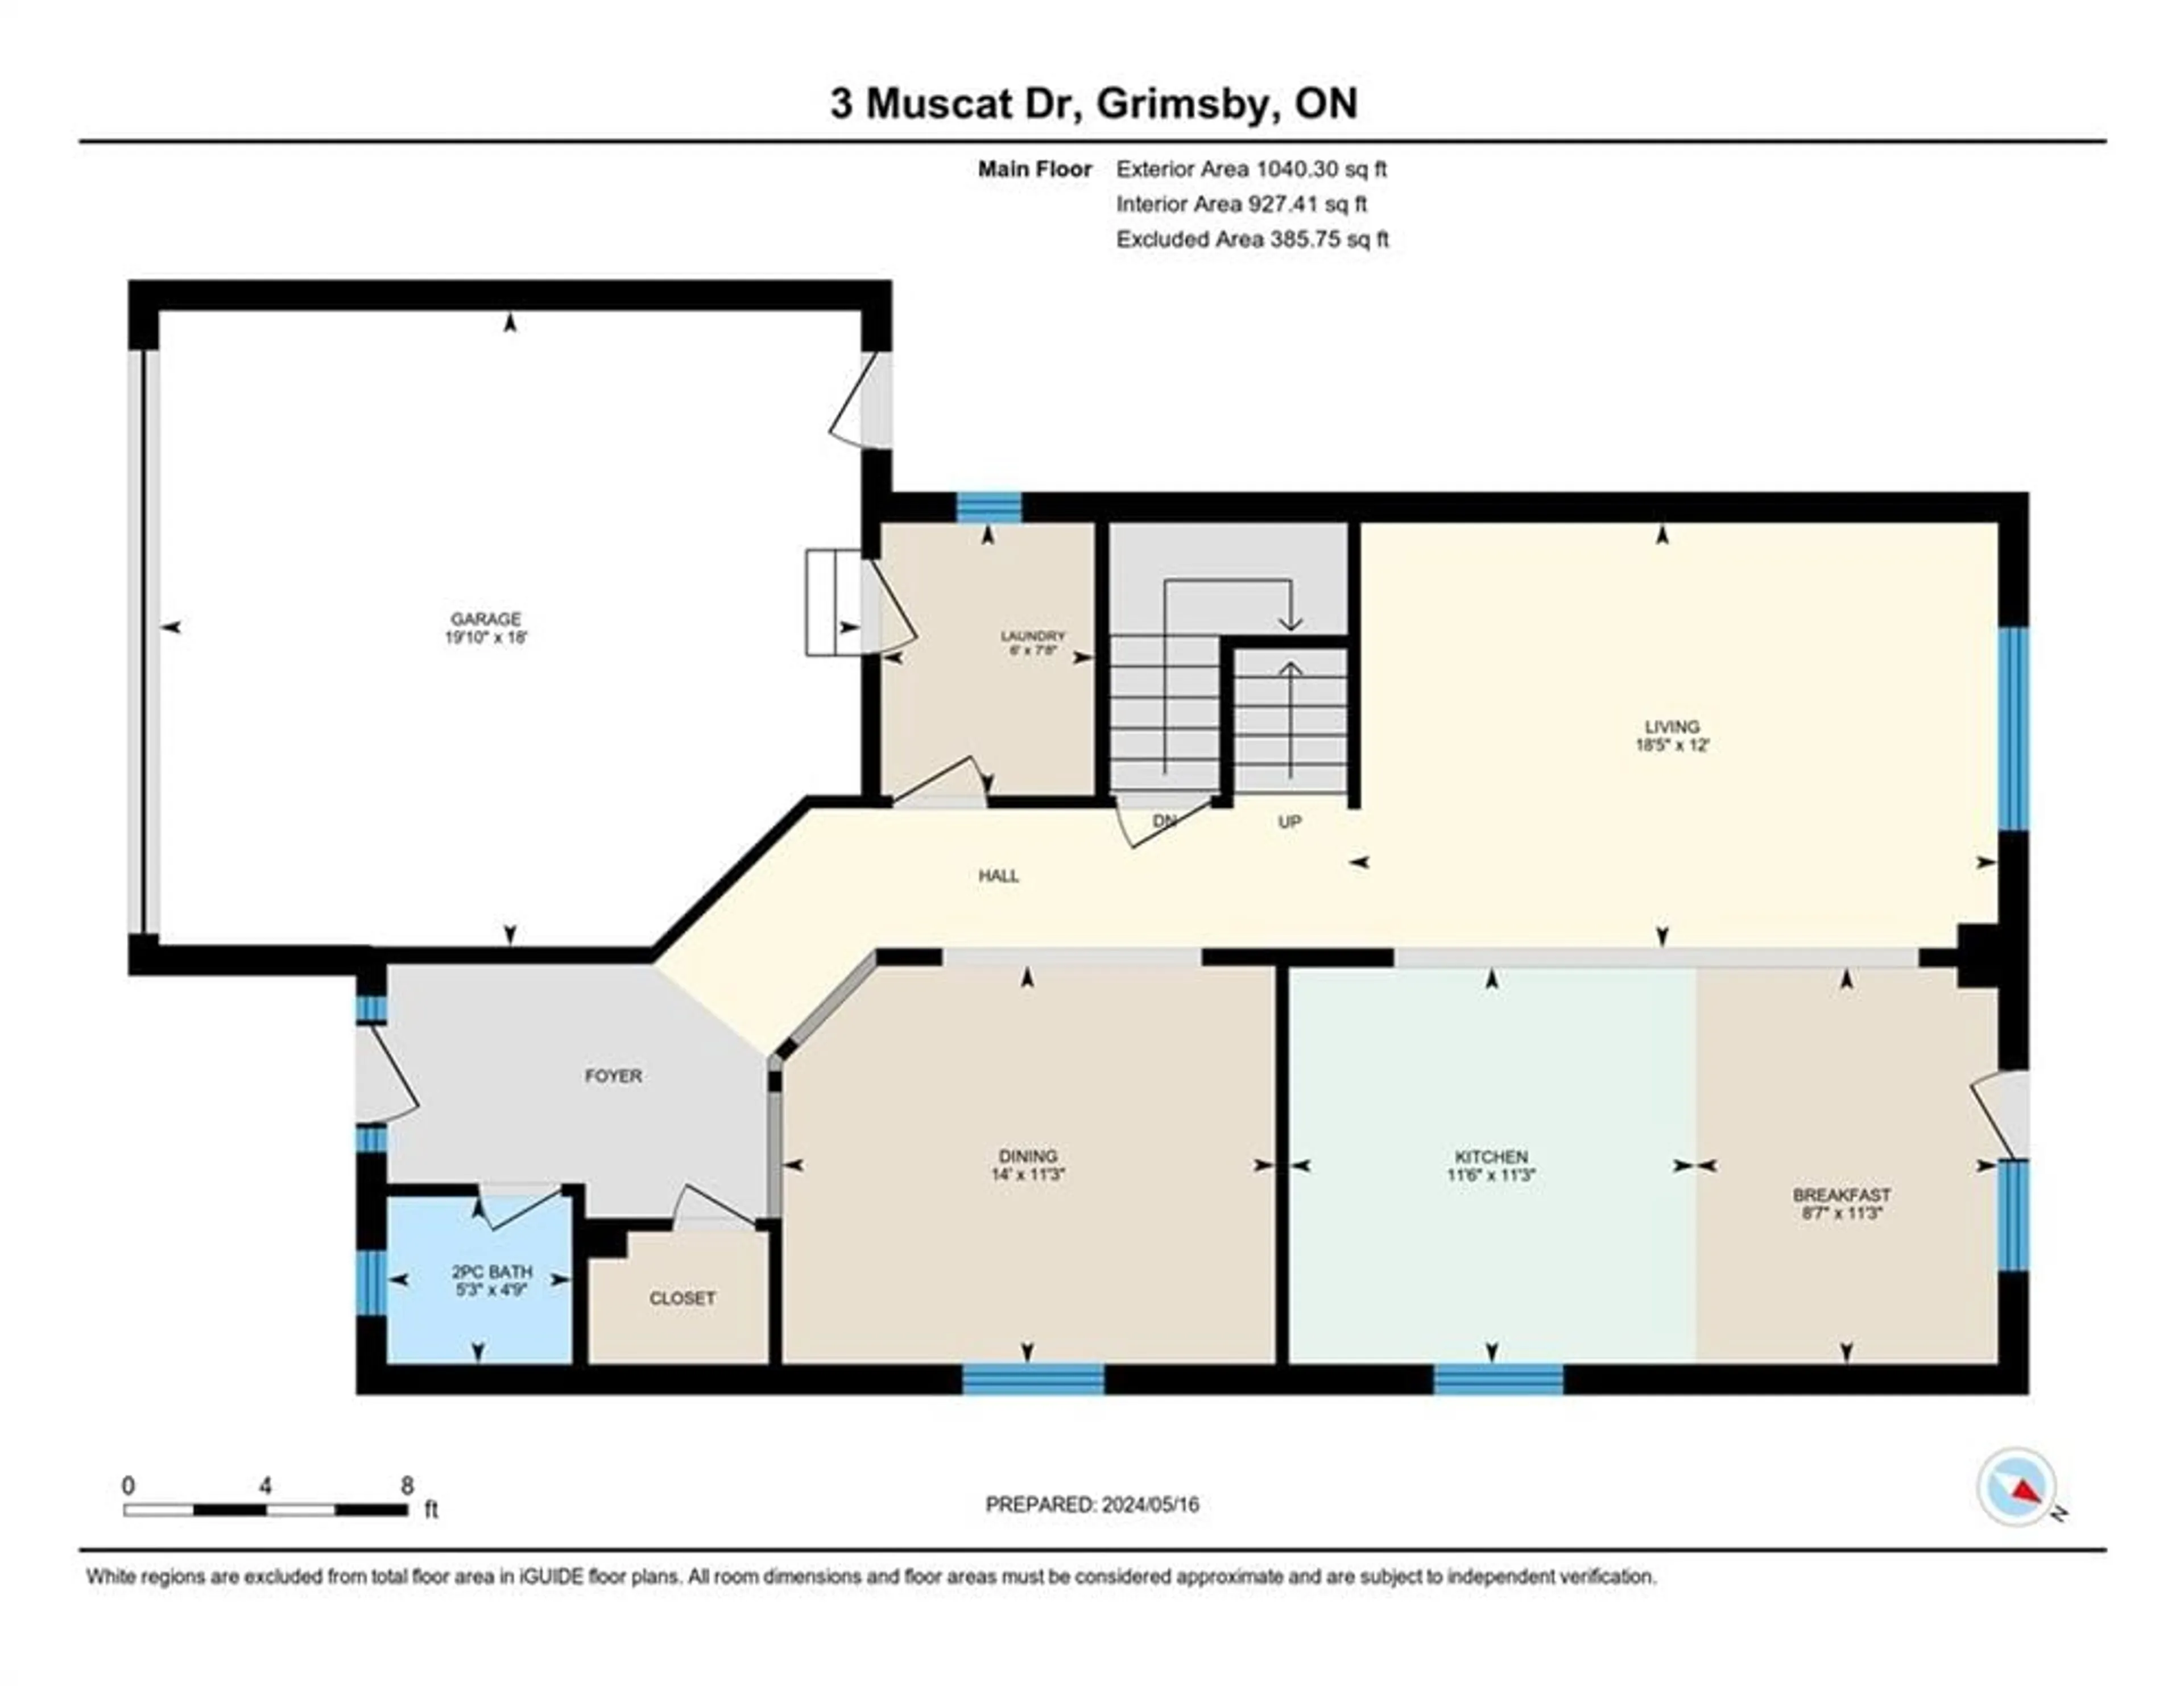 Floor plan for 3 Muscat Dr, Grimsby Ontario L3M 5N7